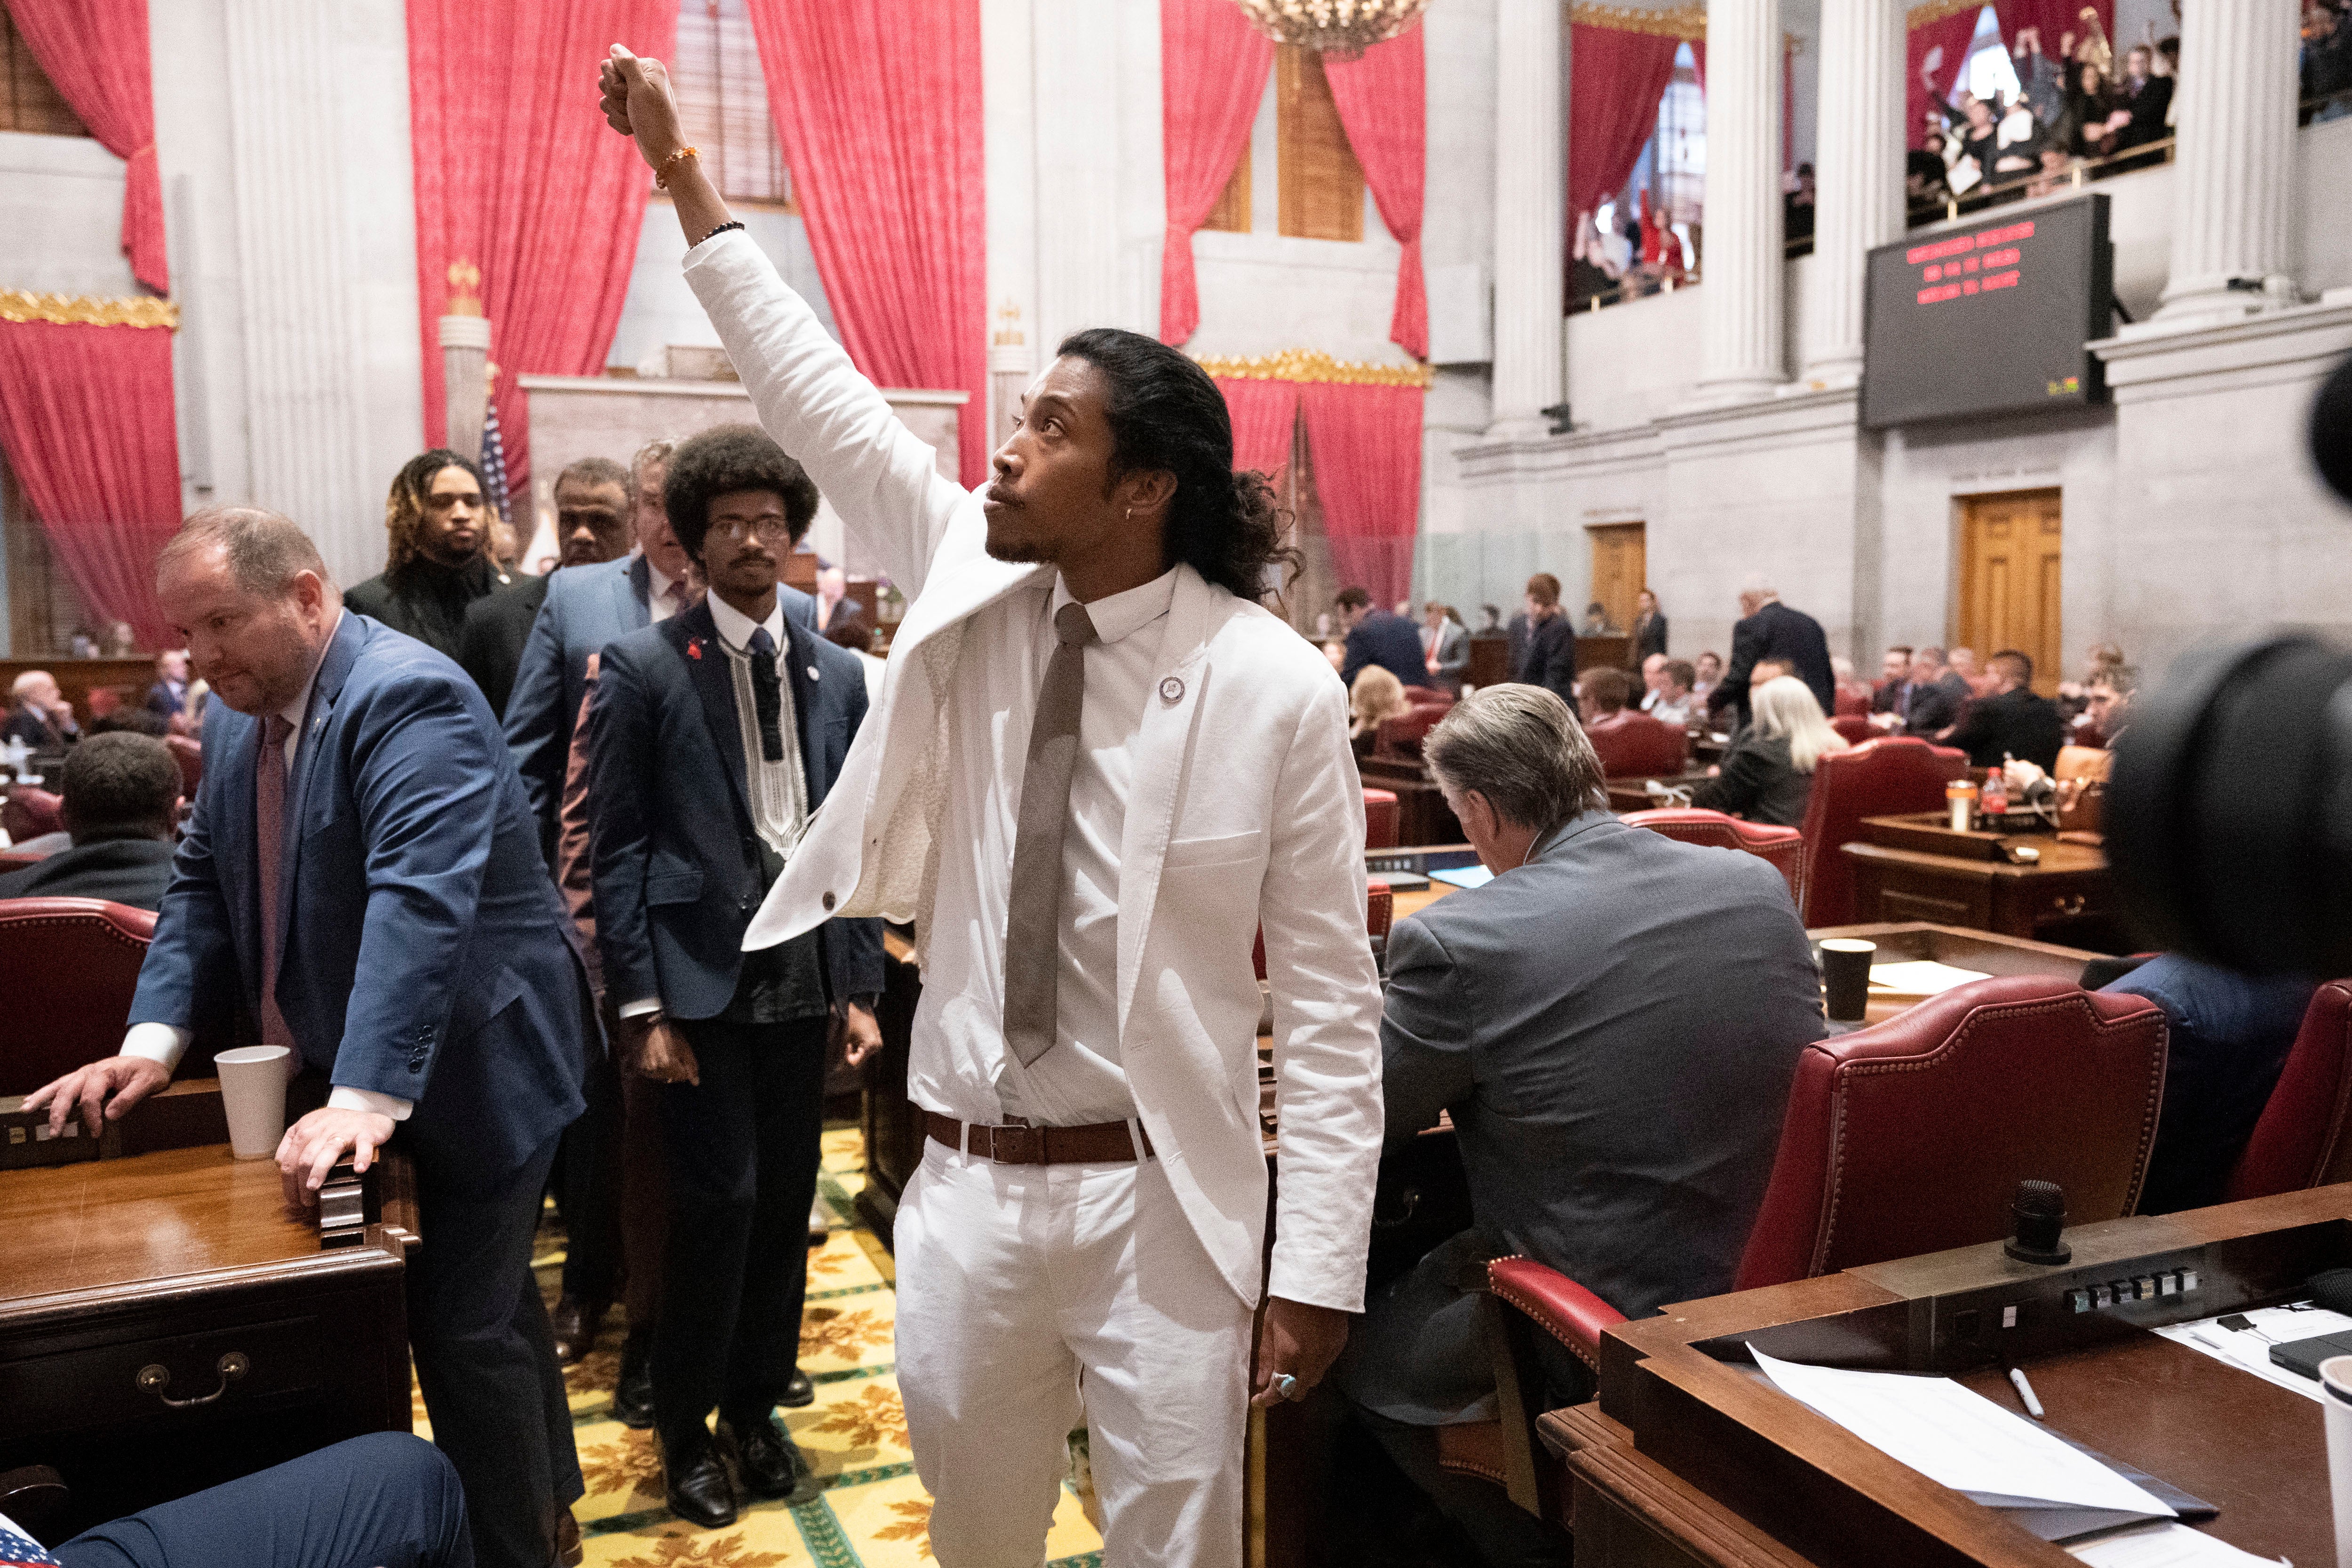 Rep Justin Jones raises his fist on the floor of the Tennessee House chamber after being expelled from the legislature on 6 April